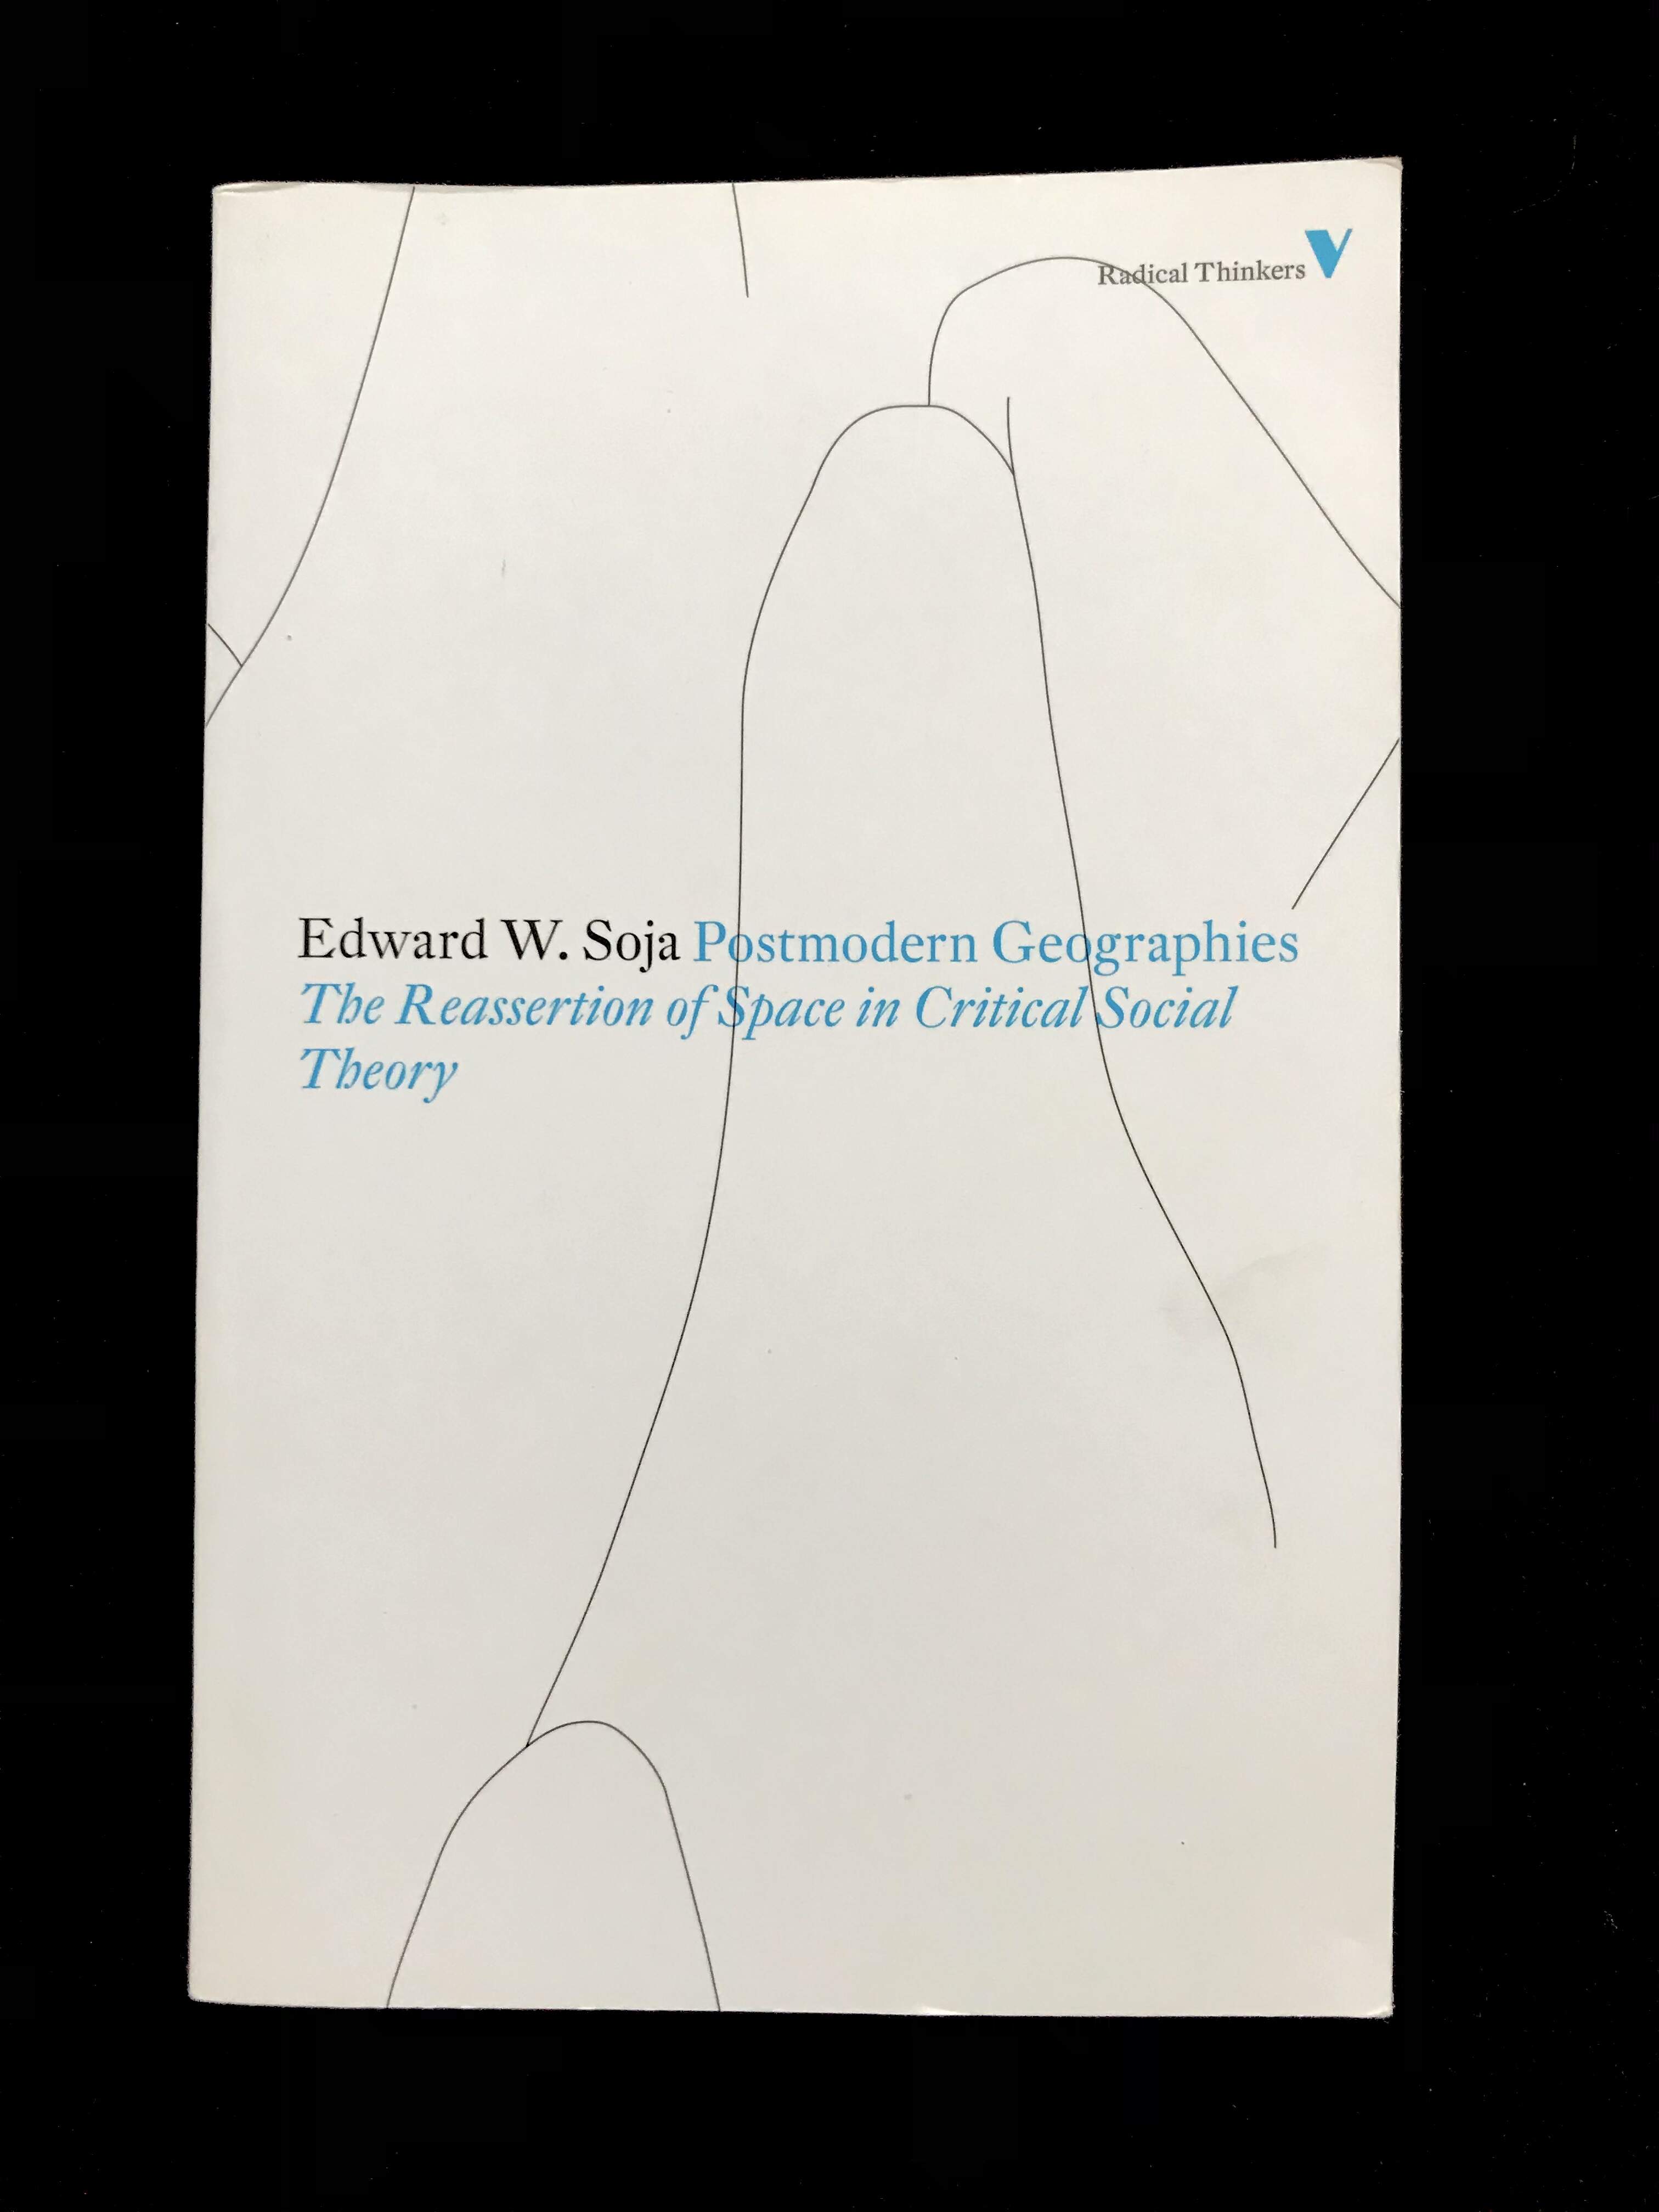 Post Modern Geographies: The Reassertion of Space in Critical Social Theory by Edward W. Soja